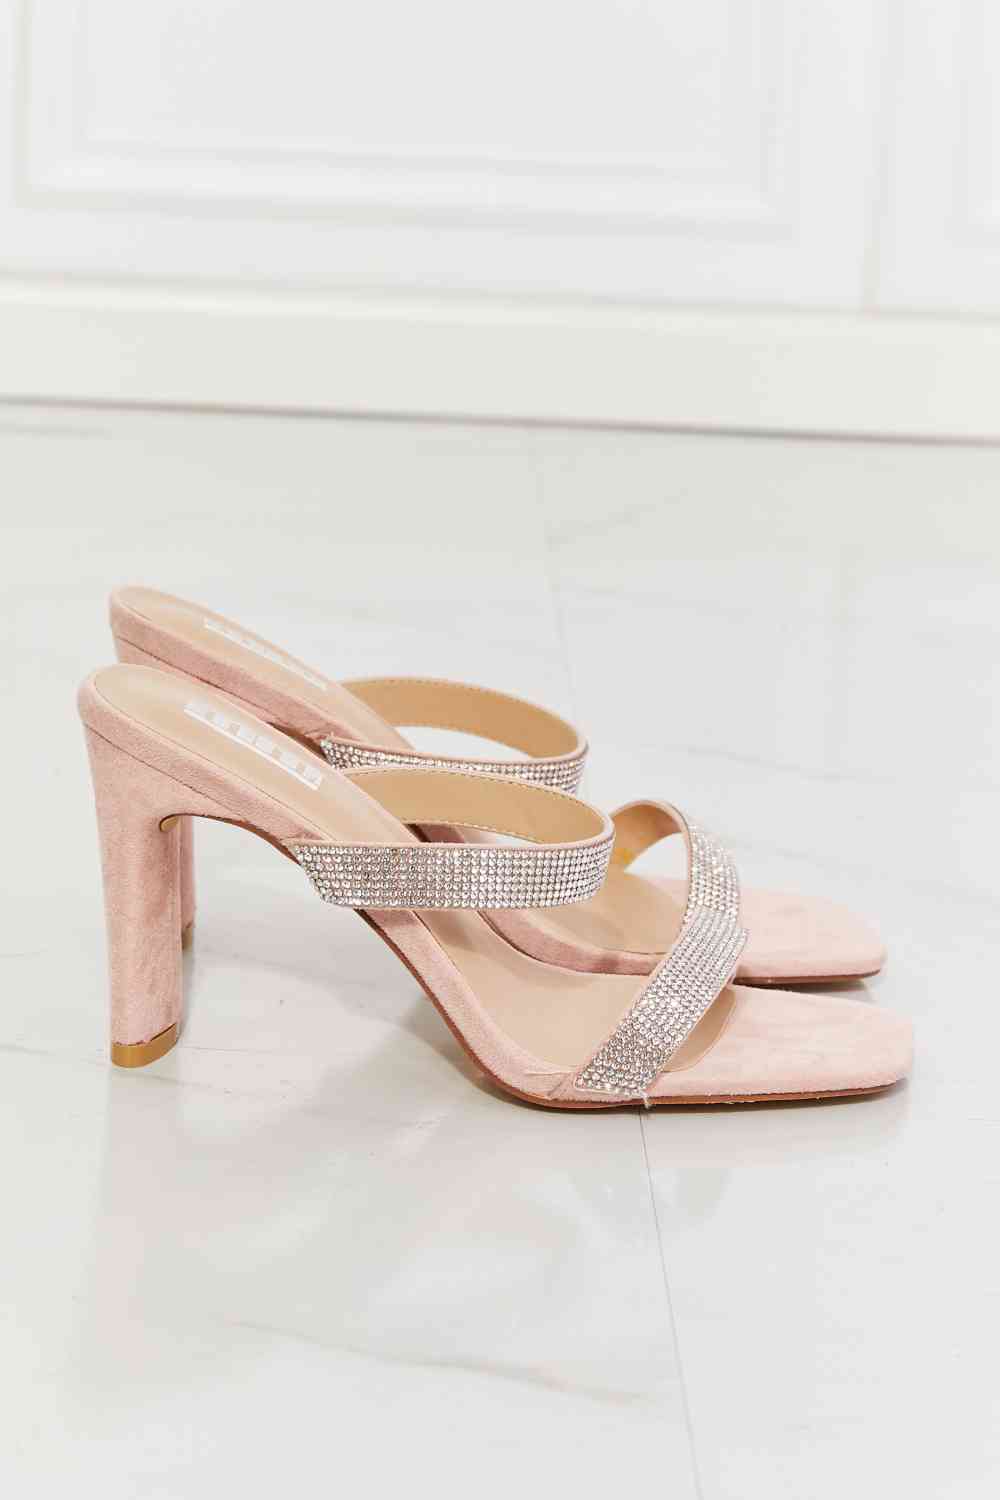 Leave A Little Sparkle Rhinestone Block Heel Sandal in Pink - Accessories - Shoes - 5 - 2024